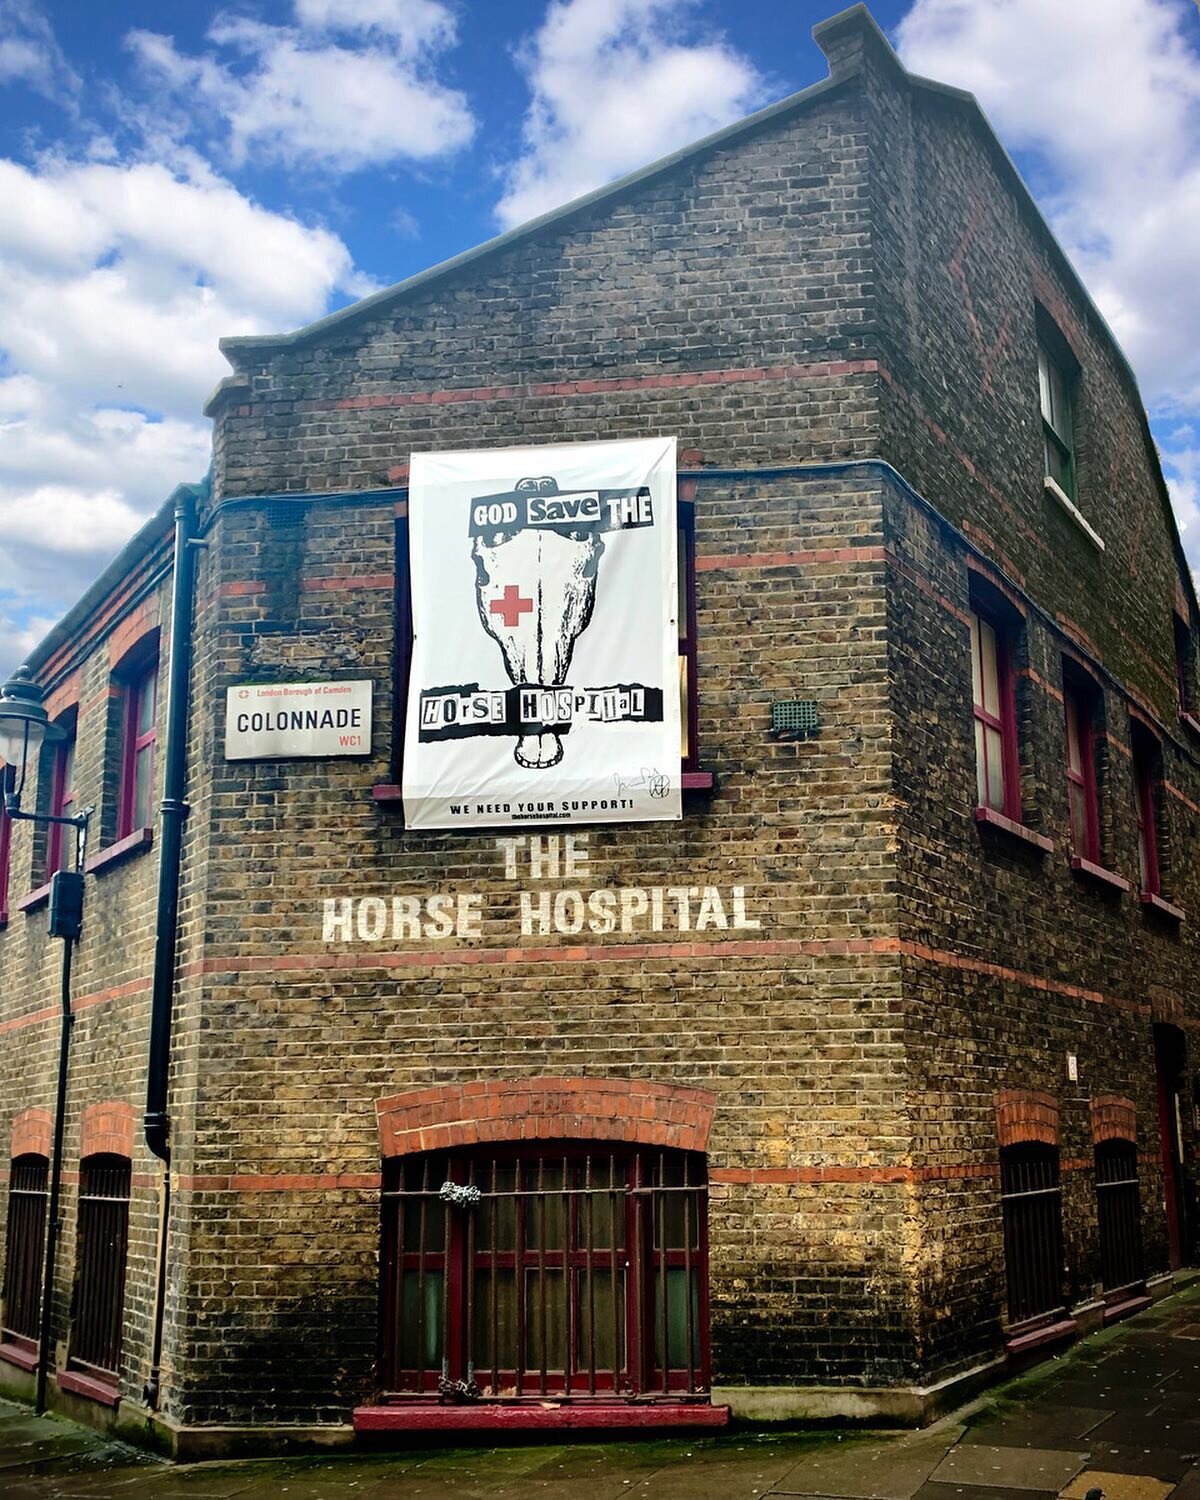 The Horse Hospital, Colonade, Bloomsbury, London WC1 - grade II listed not-for-profit independent arts venue. Built 1797 with London bricks and amazingly still very original. Venue under pressure re rent so fighting for survival. Large banner outside